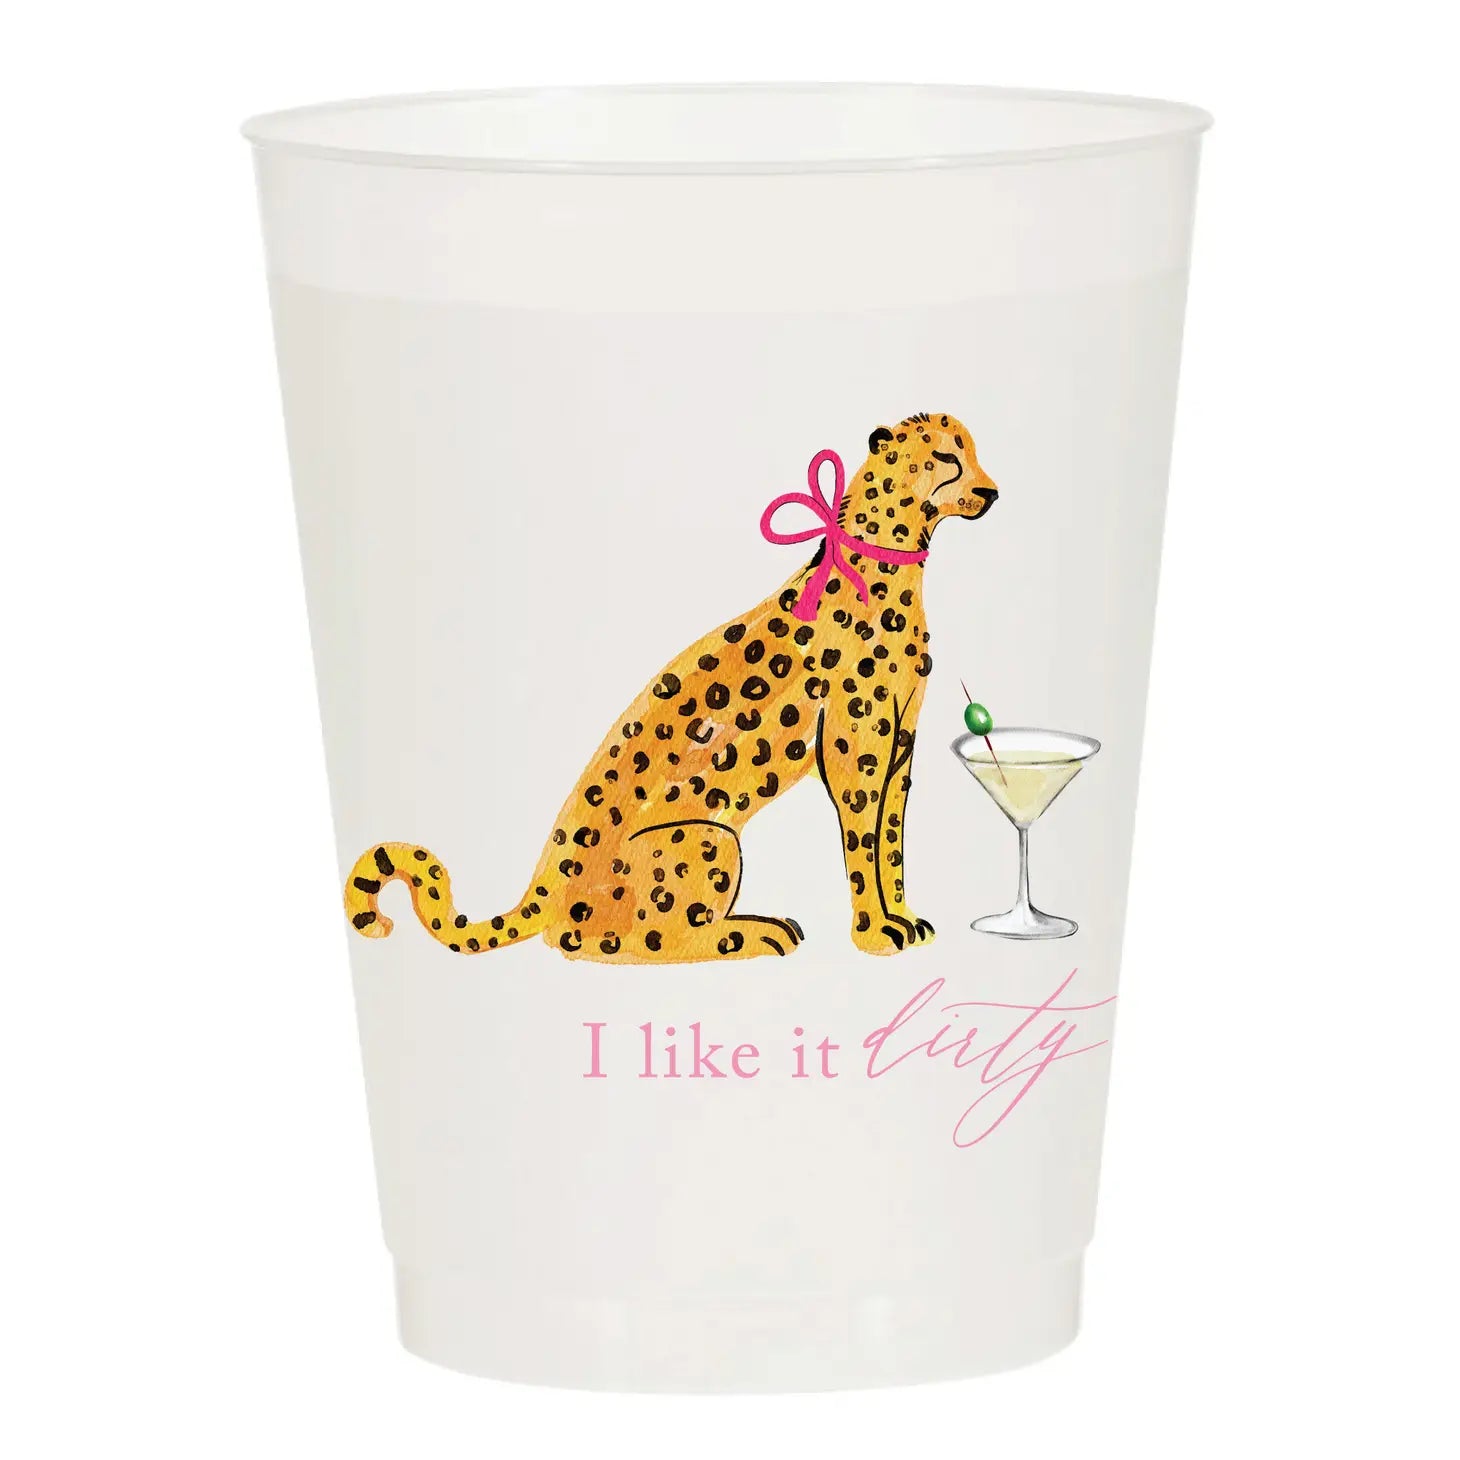 I Like it Dirty - Set of 6 Reusable Cups